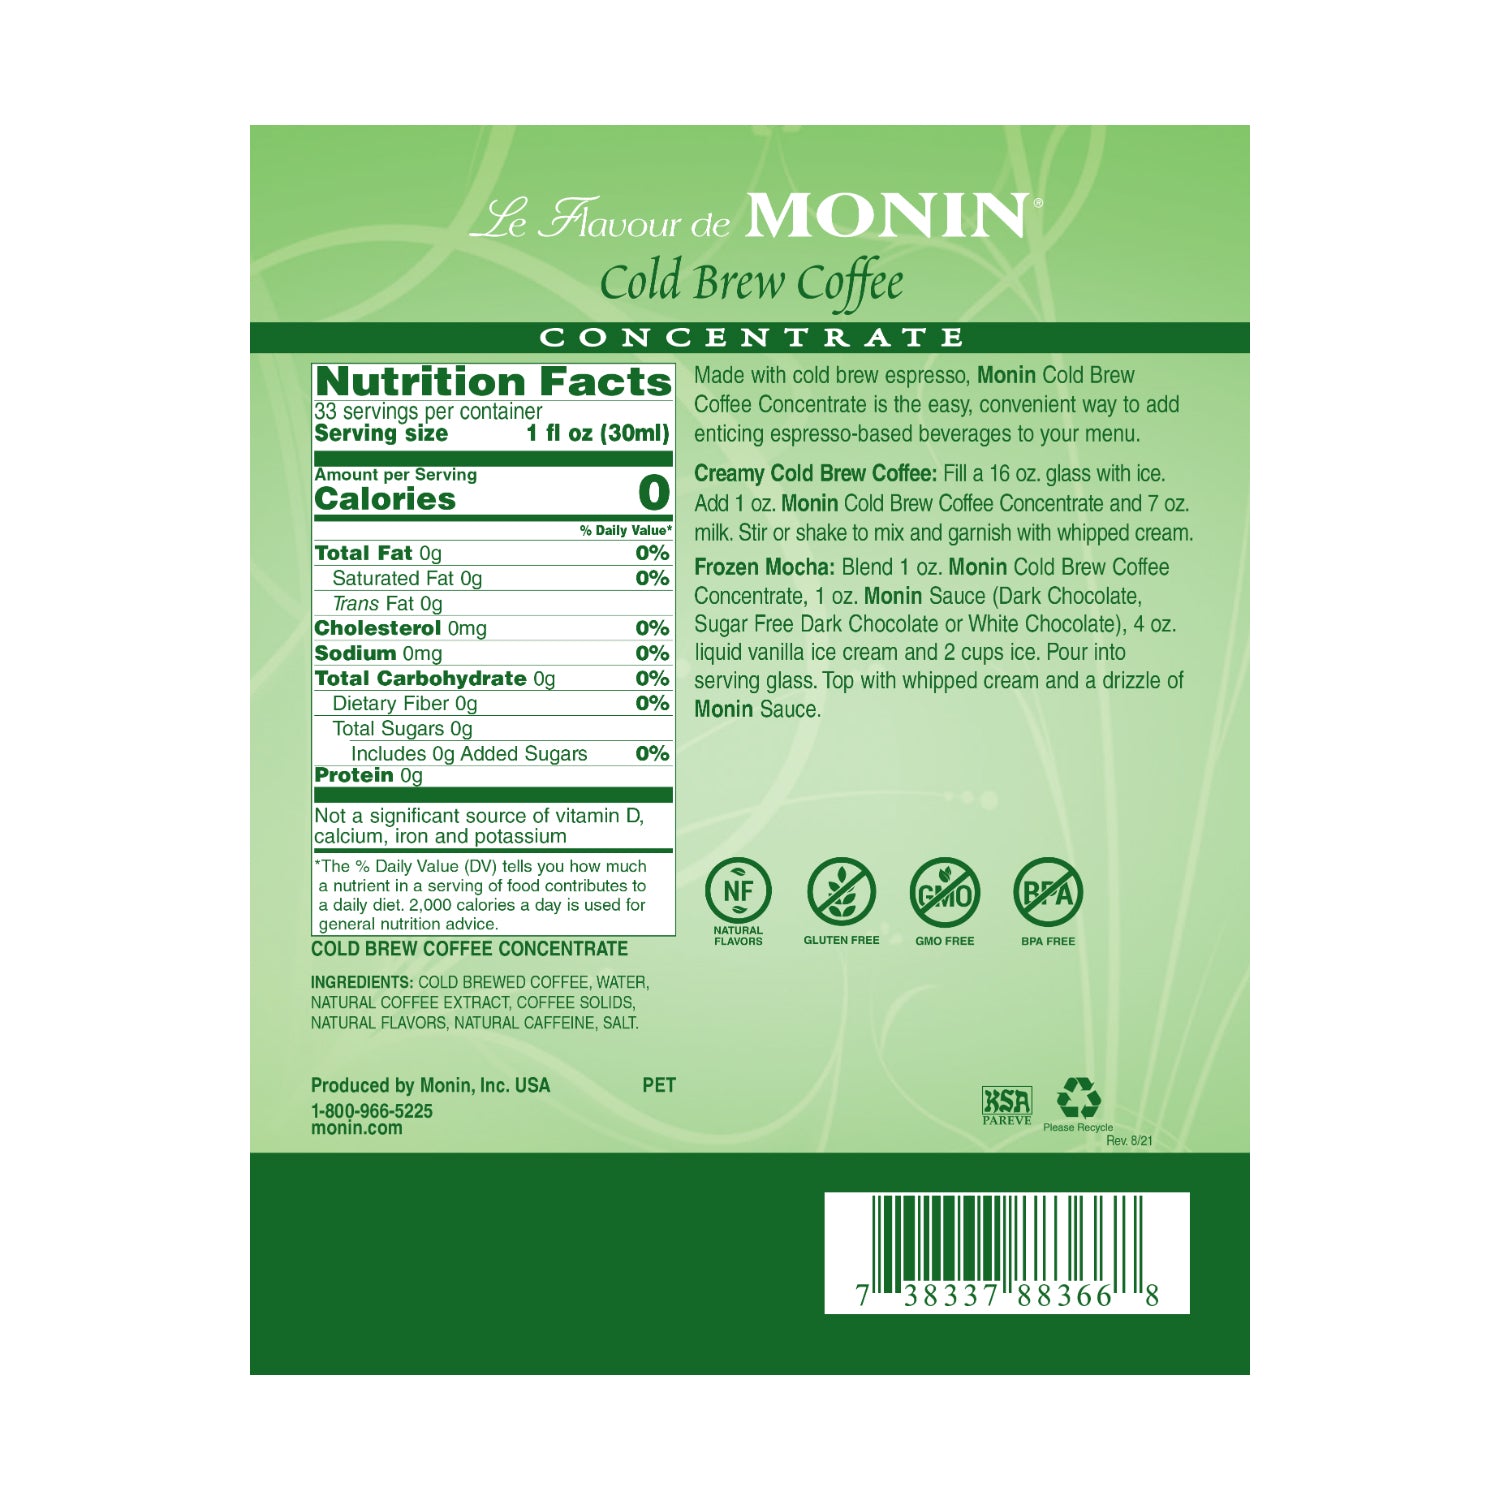 Monin True Brewed Espresso Concentrate nutrition facts and directions labell